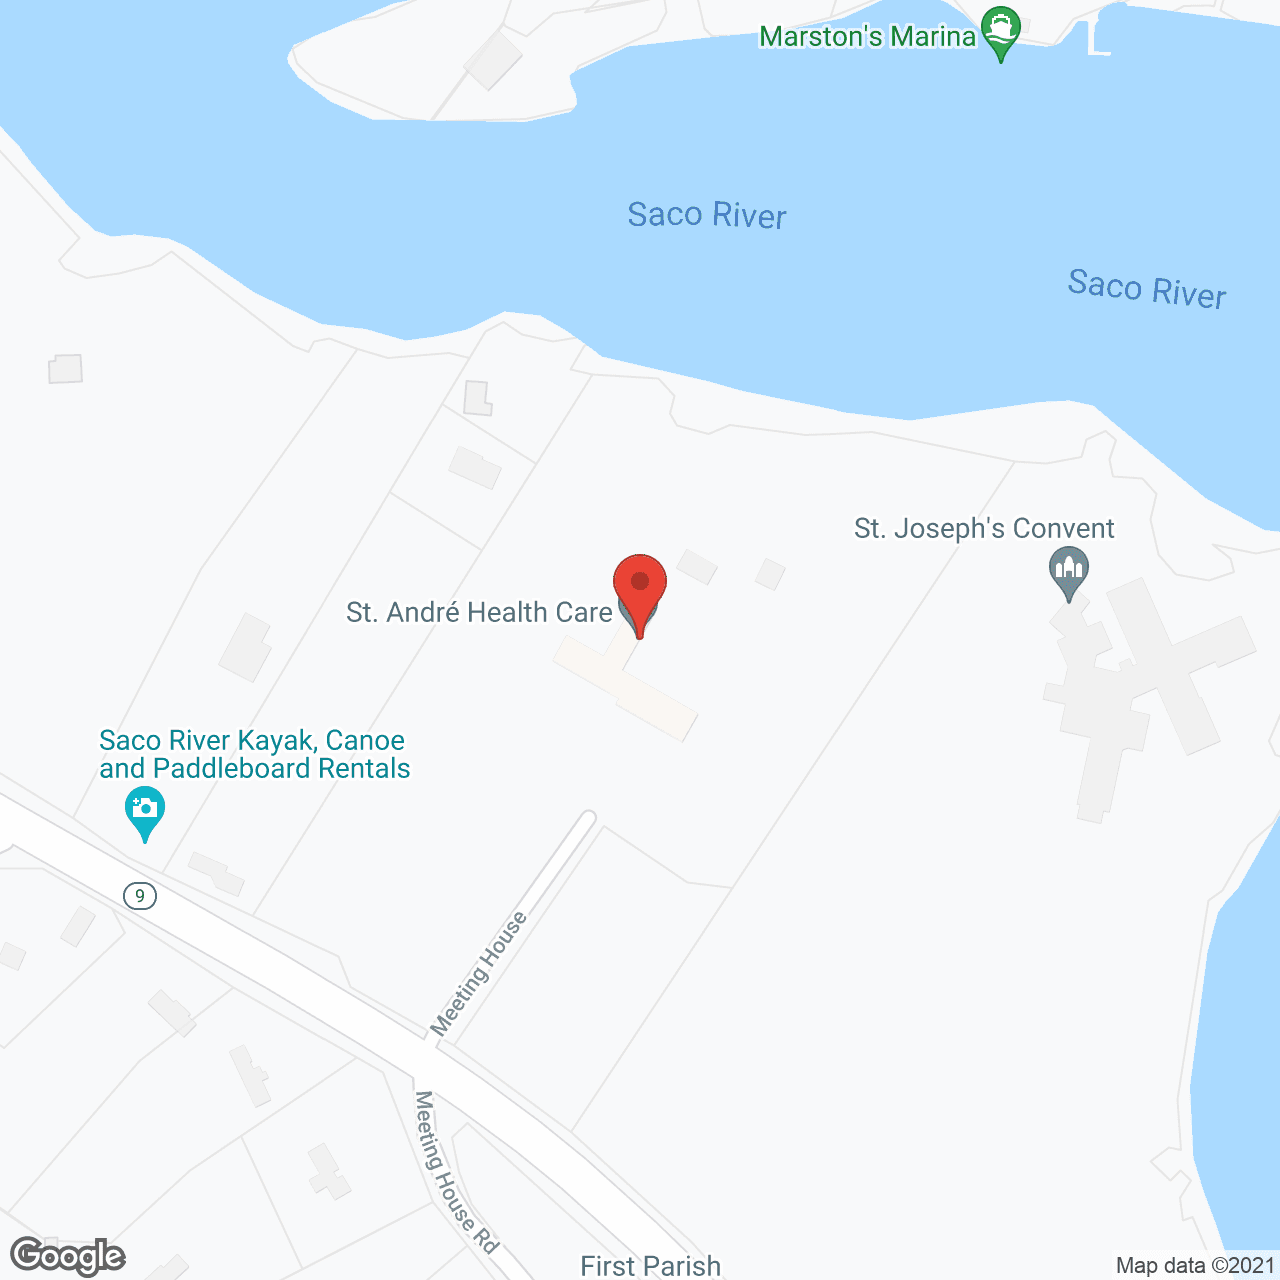 St Andre Health Care Facility in google map